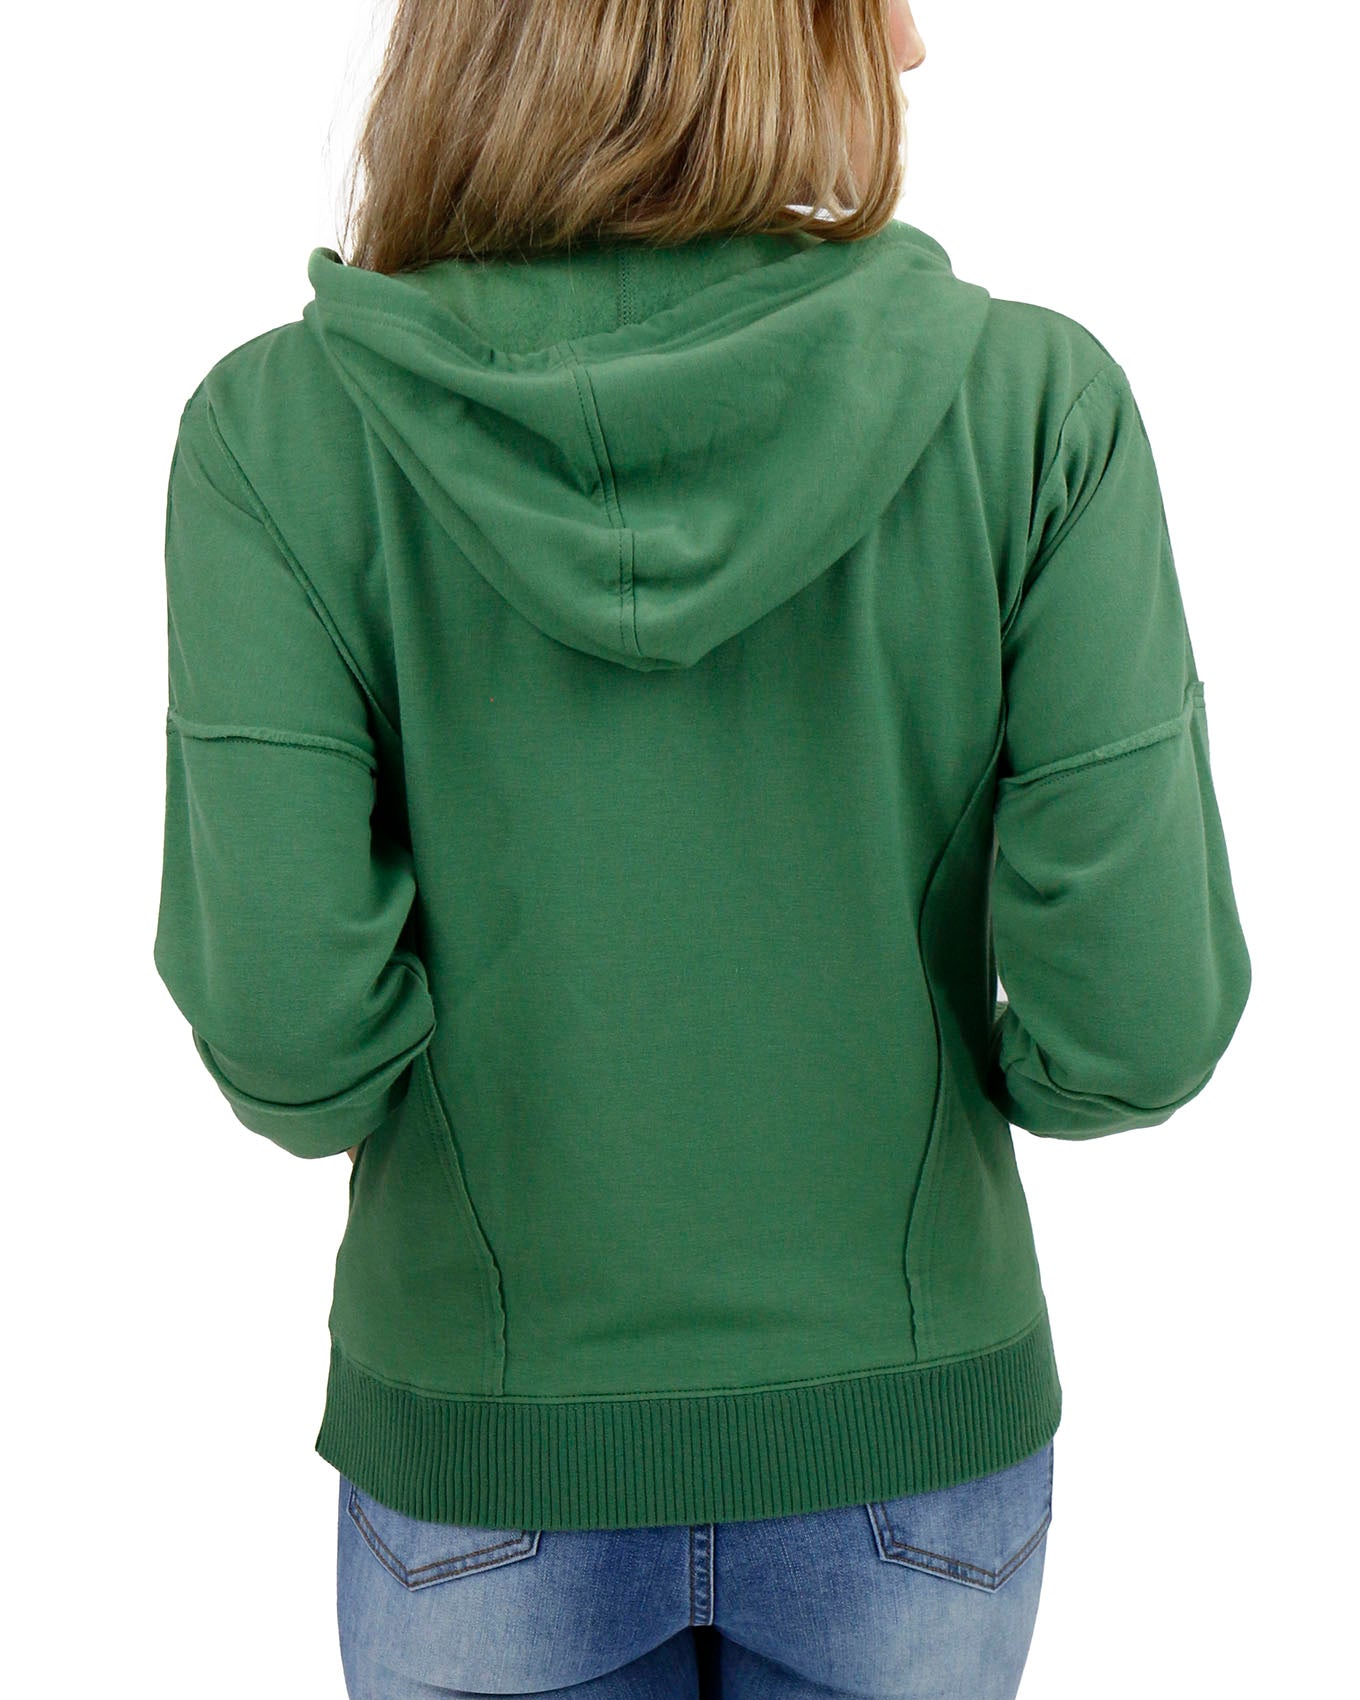 Signature Soft Hedge Green Zip Up Hoodie - Grace and Lace